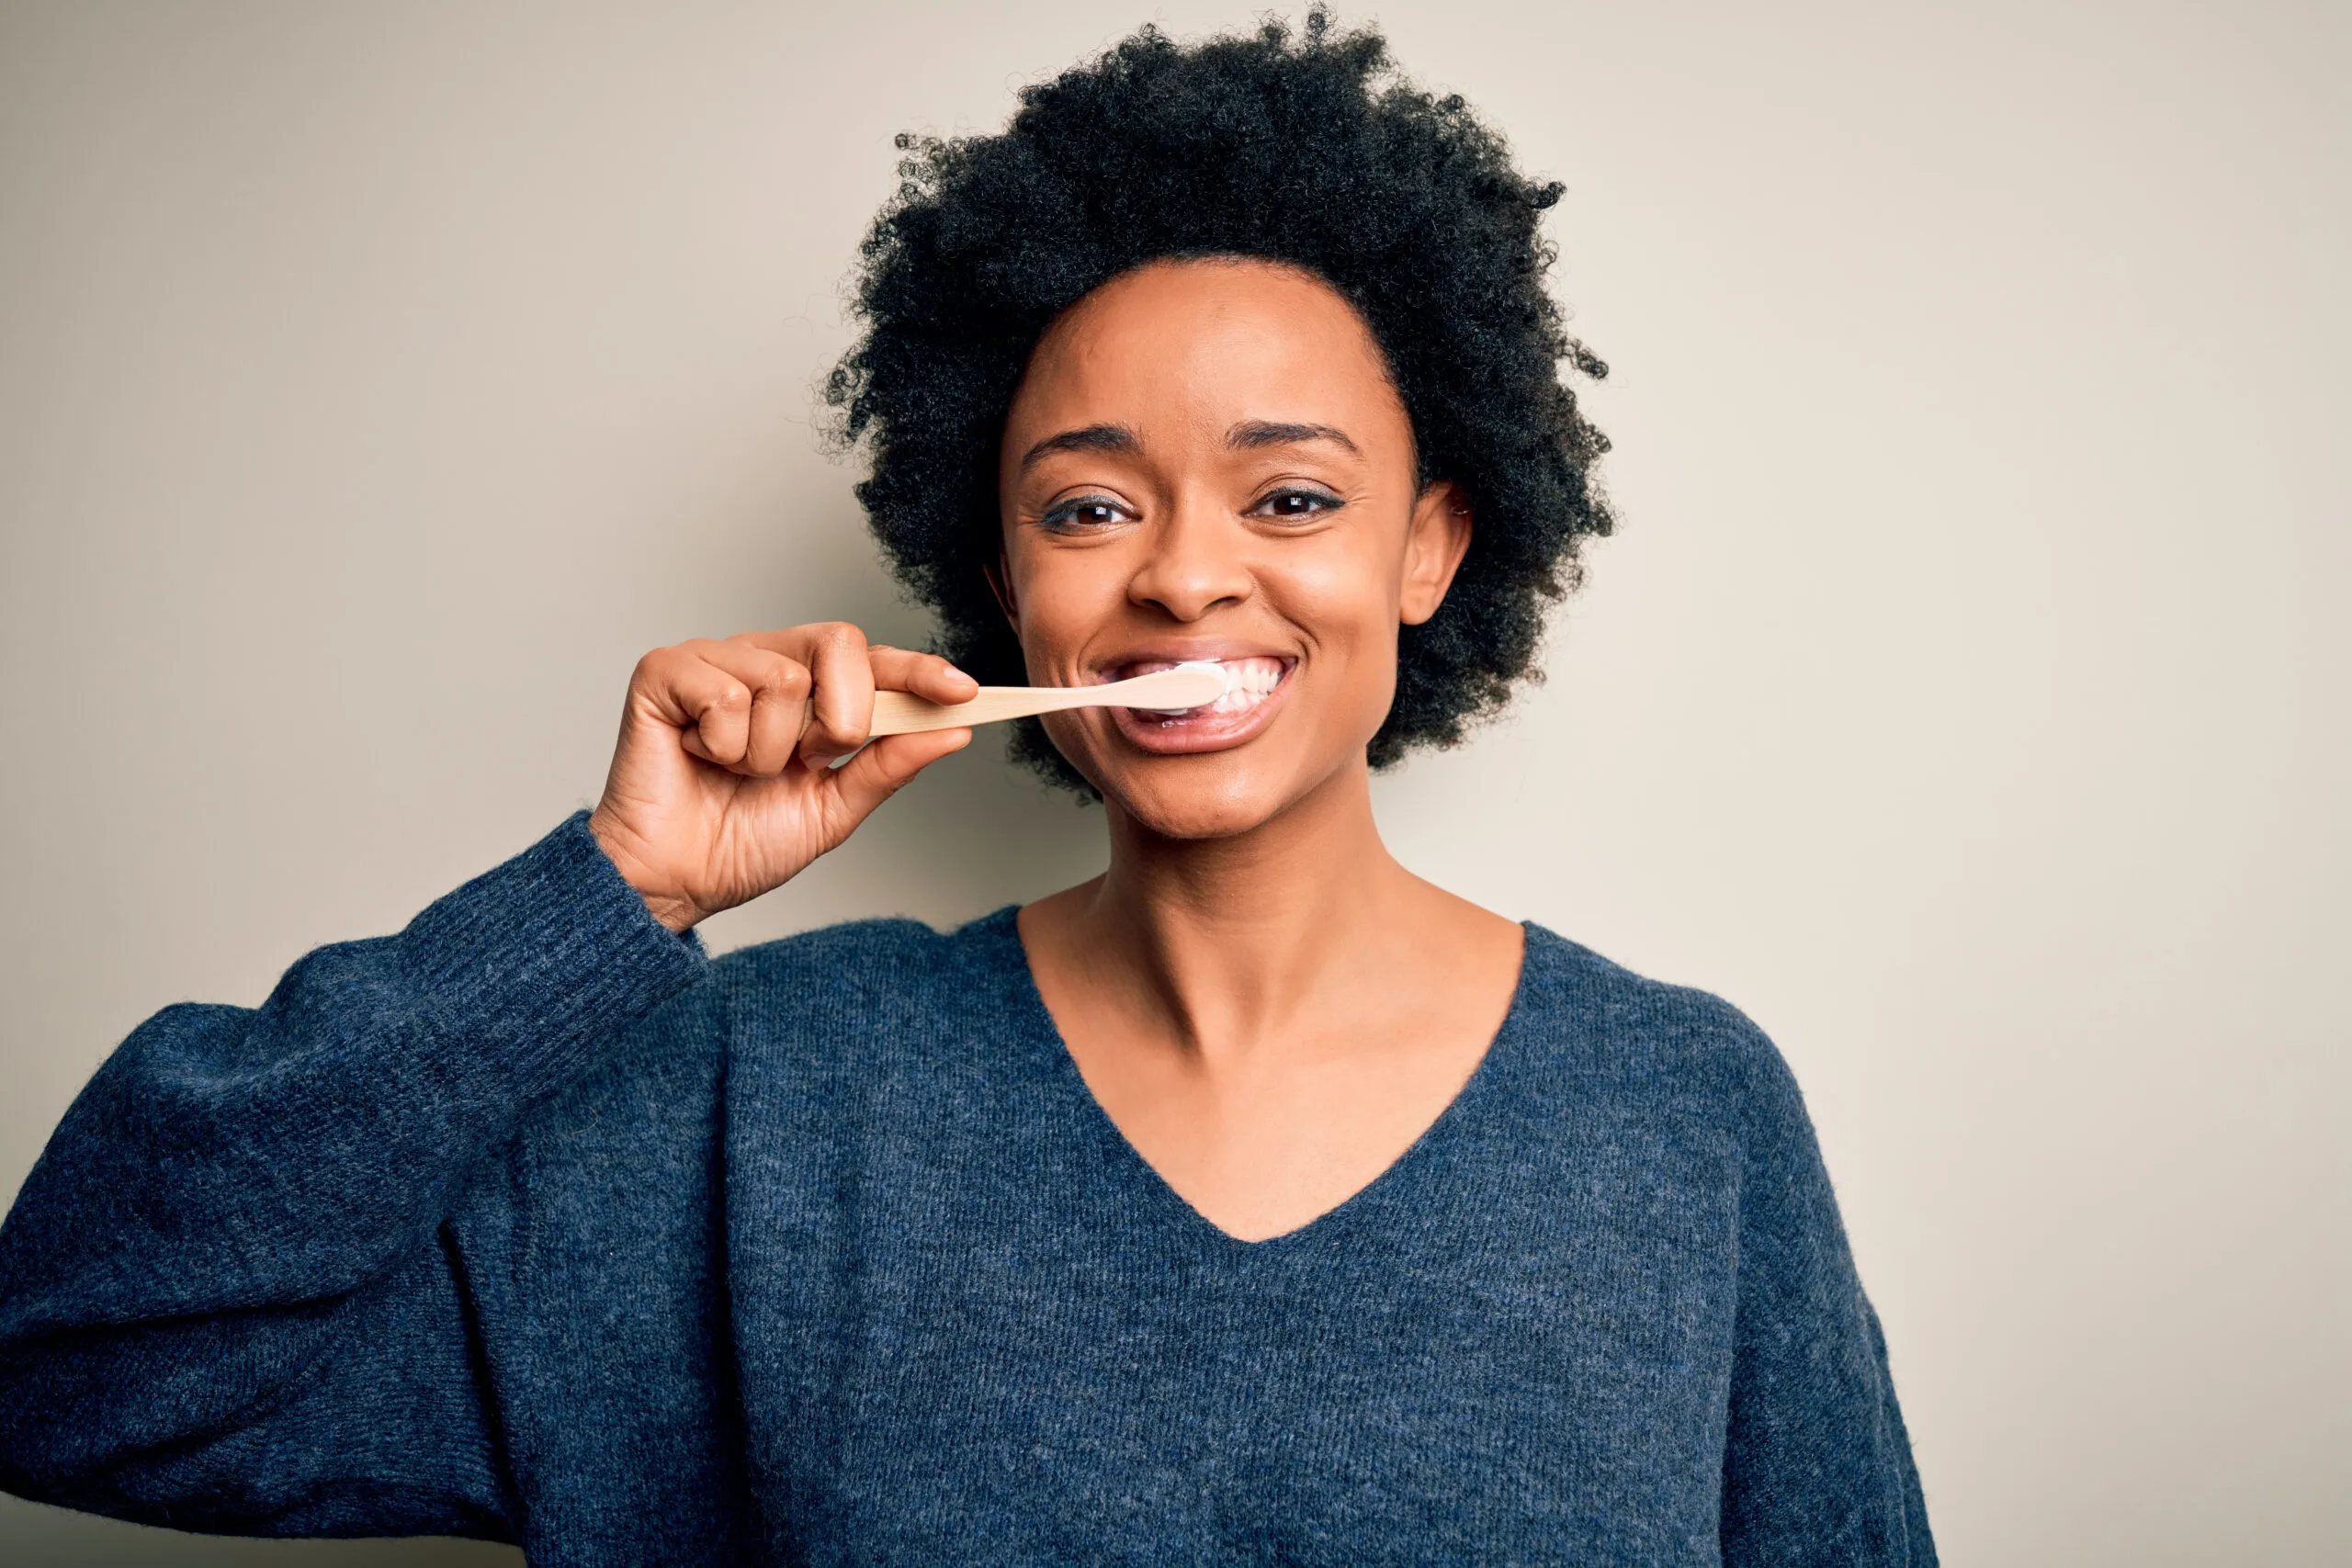 Teeth Whitening Toothpaste: Your Affordable Tool for a Stunning Smile